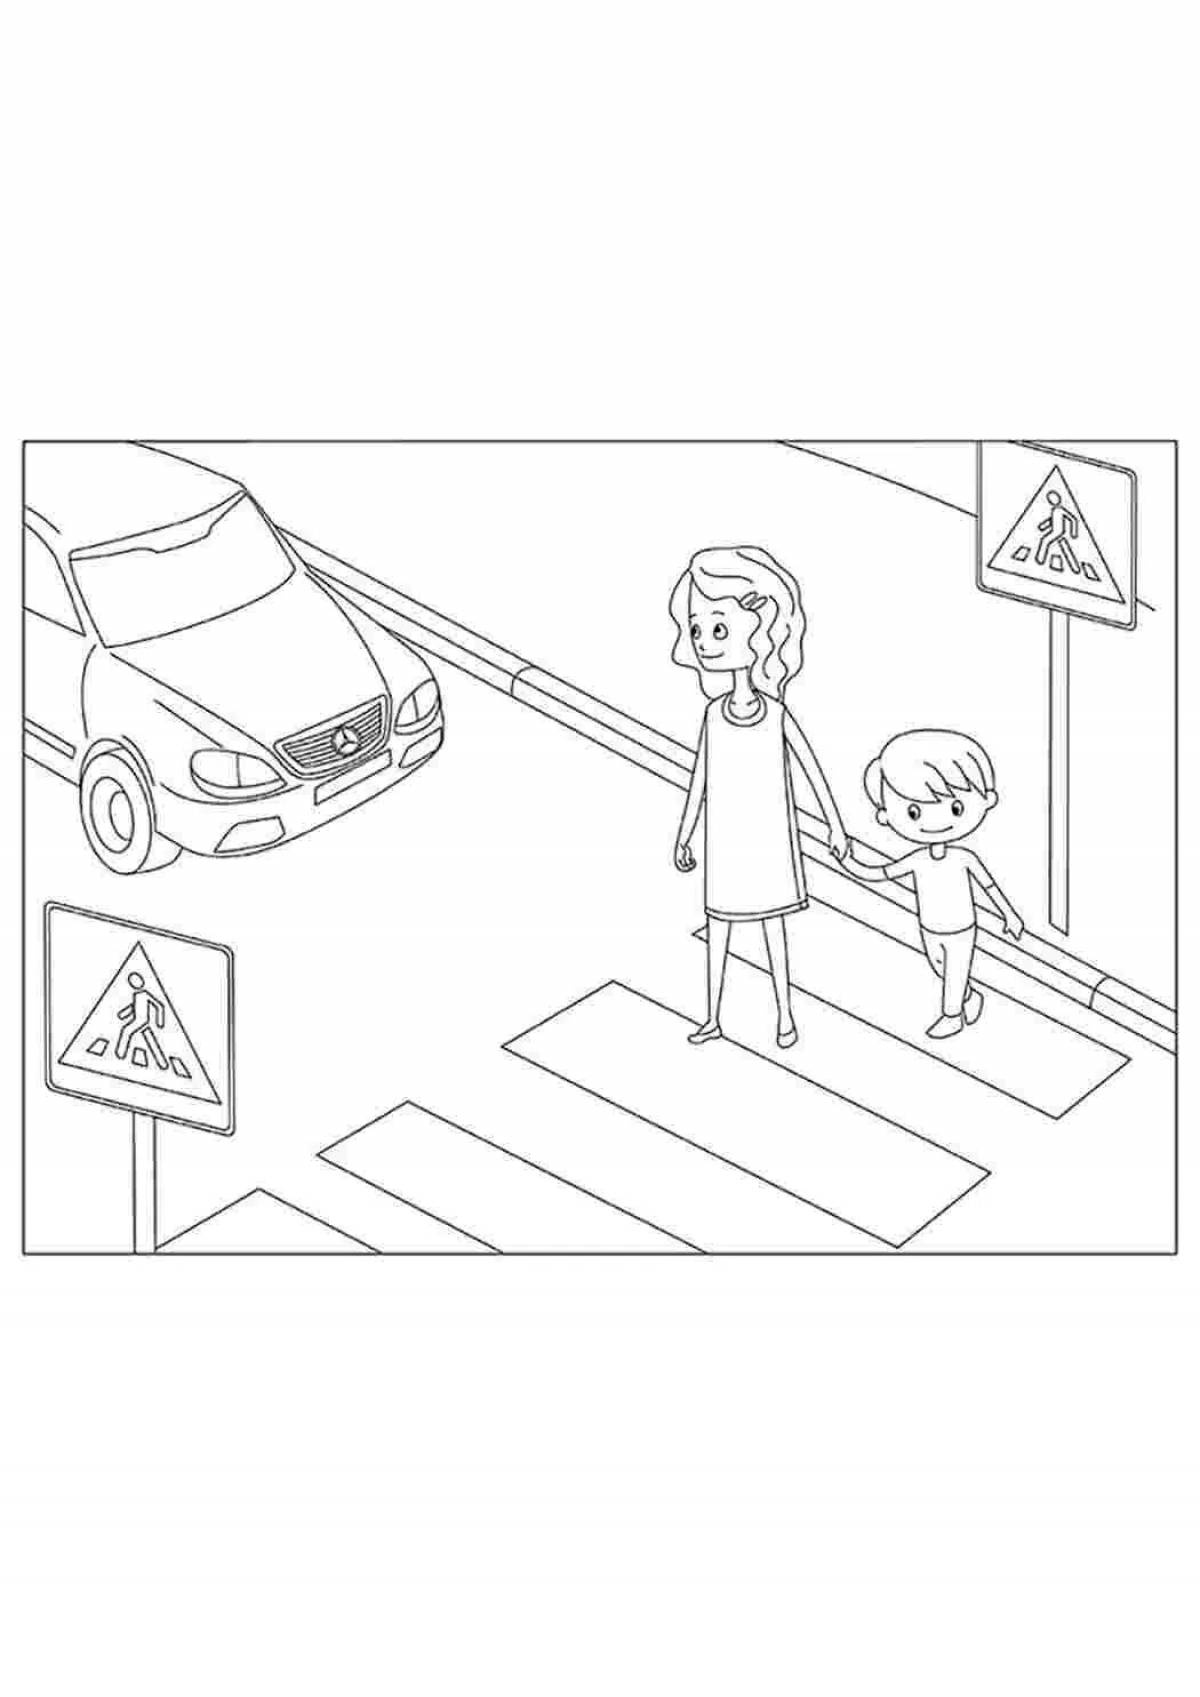 According to the rules of the road for children #7